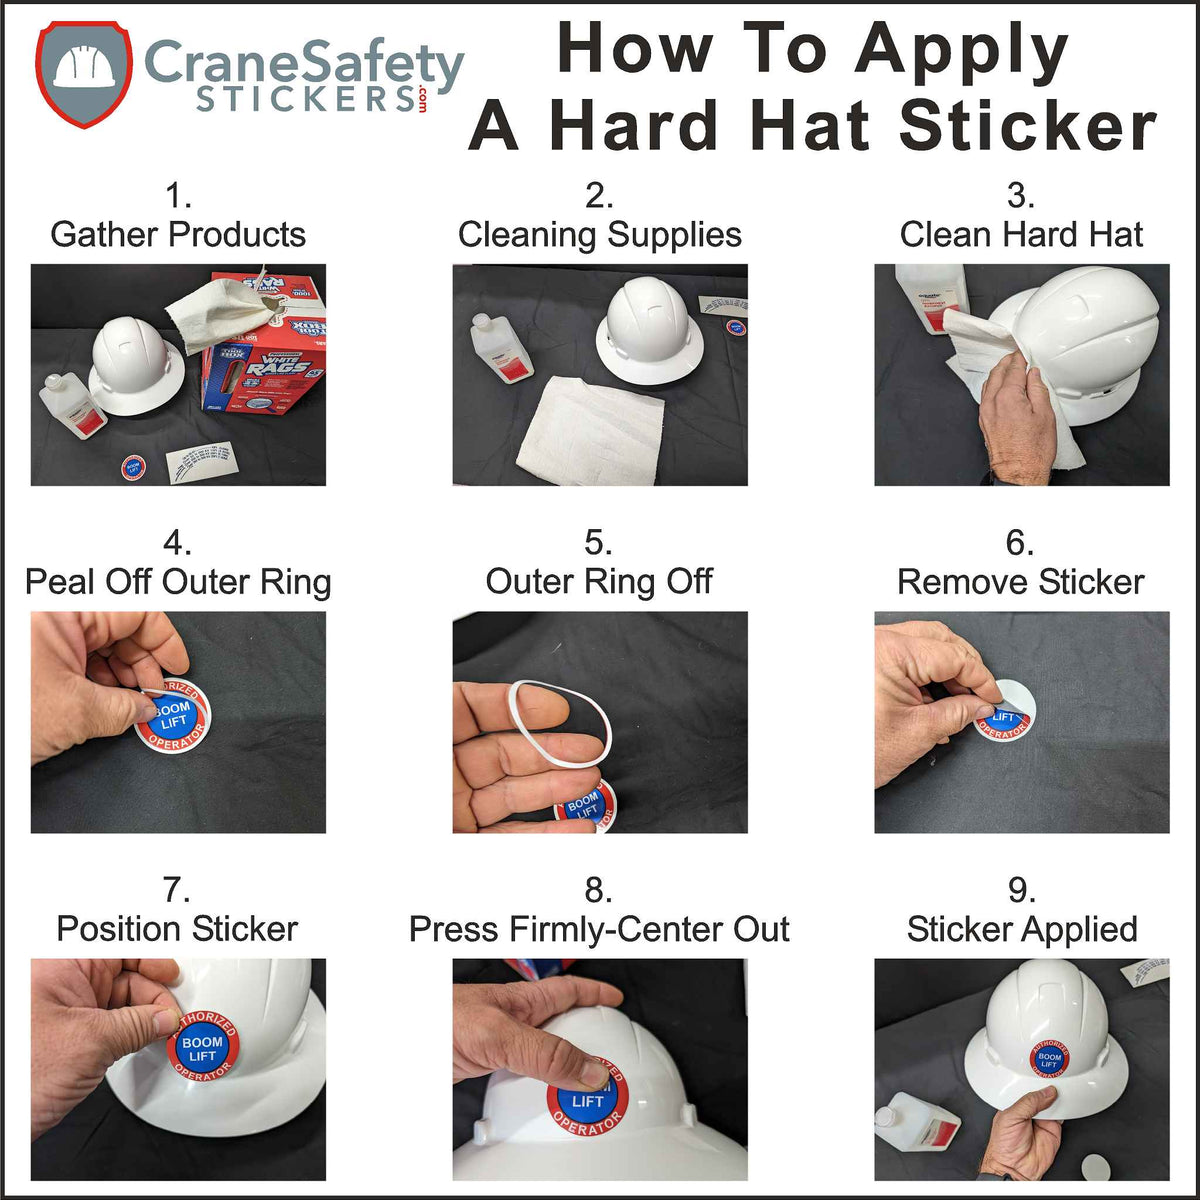 How To Apply Our Emergency Medical Technician Hard Hat Sticker To a Hard Hat.